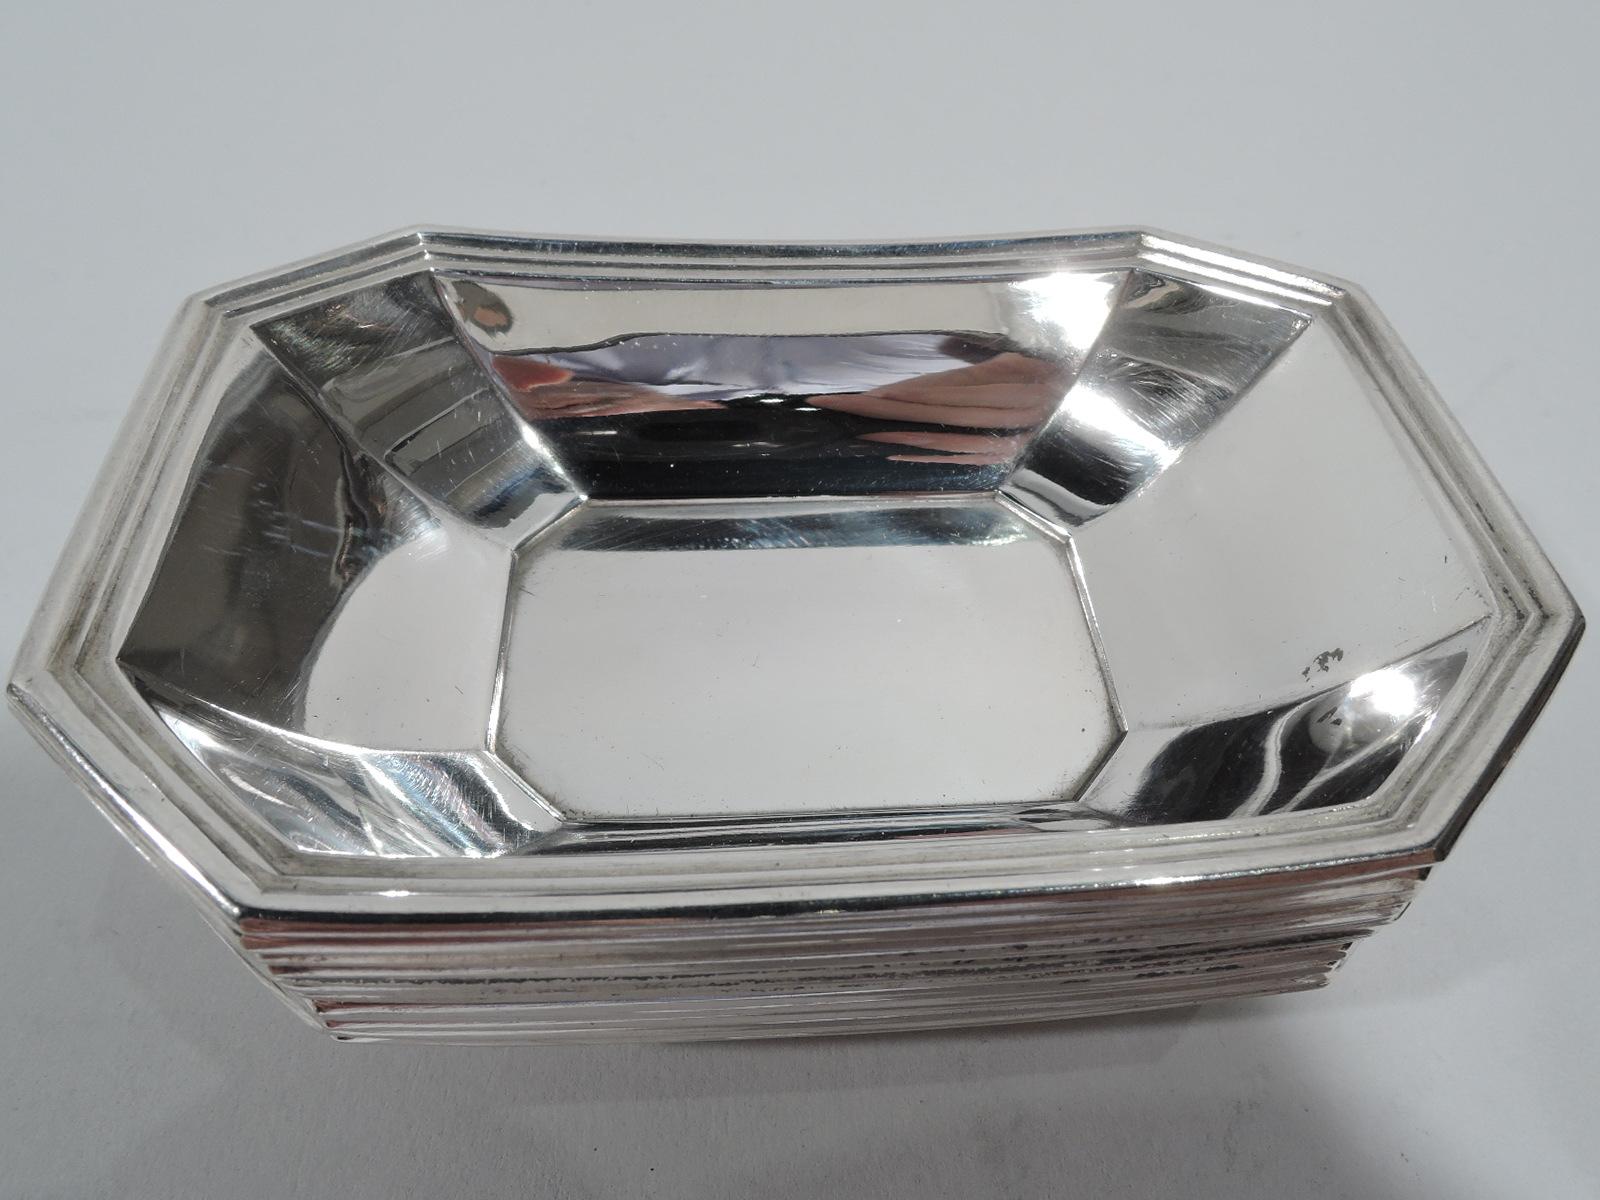 Set of 12 Fairfax sterling silver nut dishes. Made by Gorham and Durgin (part of Gorham) in Providence. Each: Rectilinear with curved and tapering sides, concave corners, and reeded rim. Great pieces in the historic Art Deco pattern. Fully marked